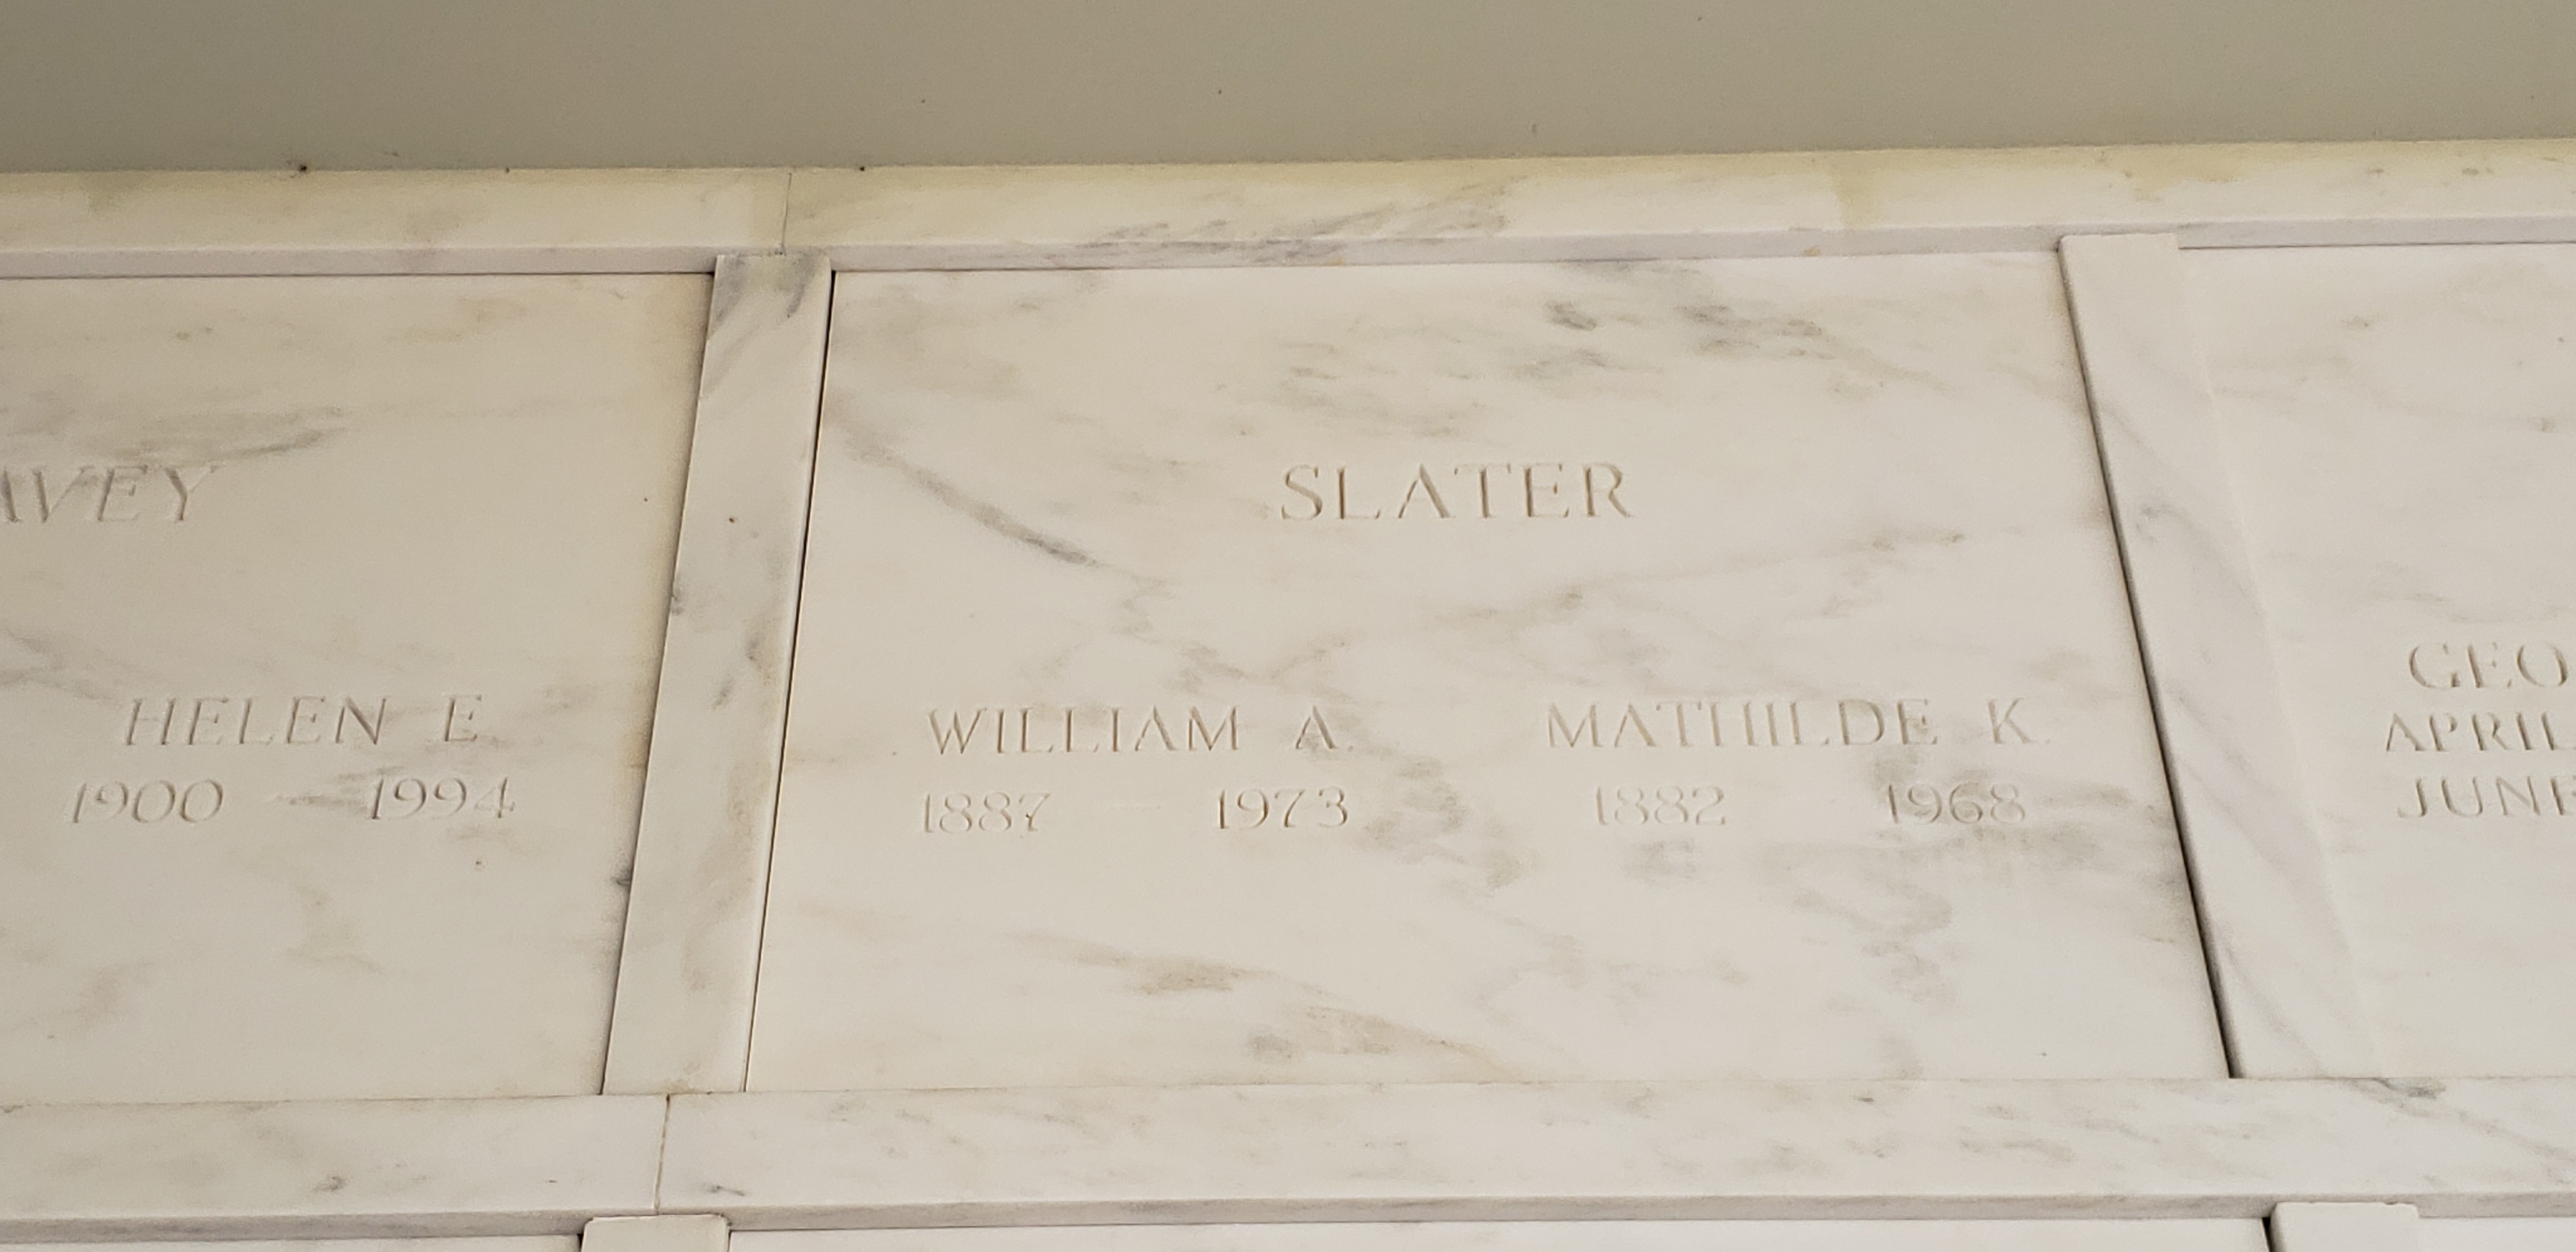 William A Slater